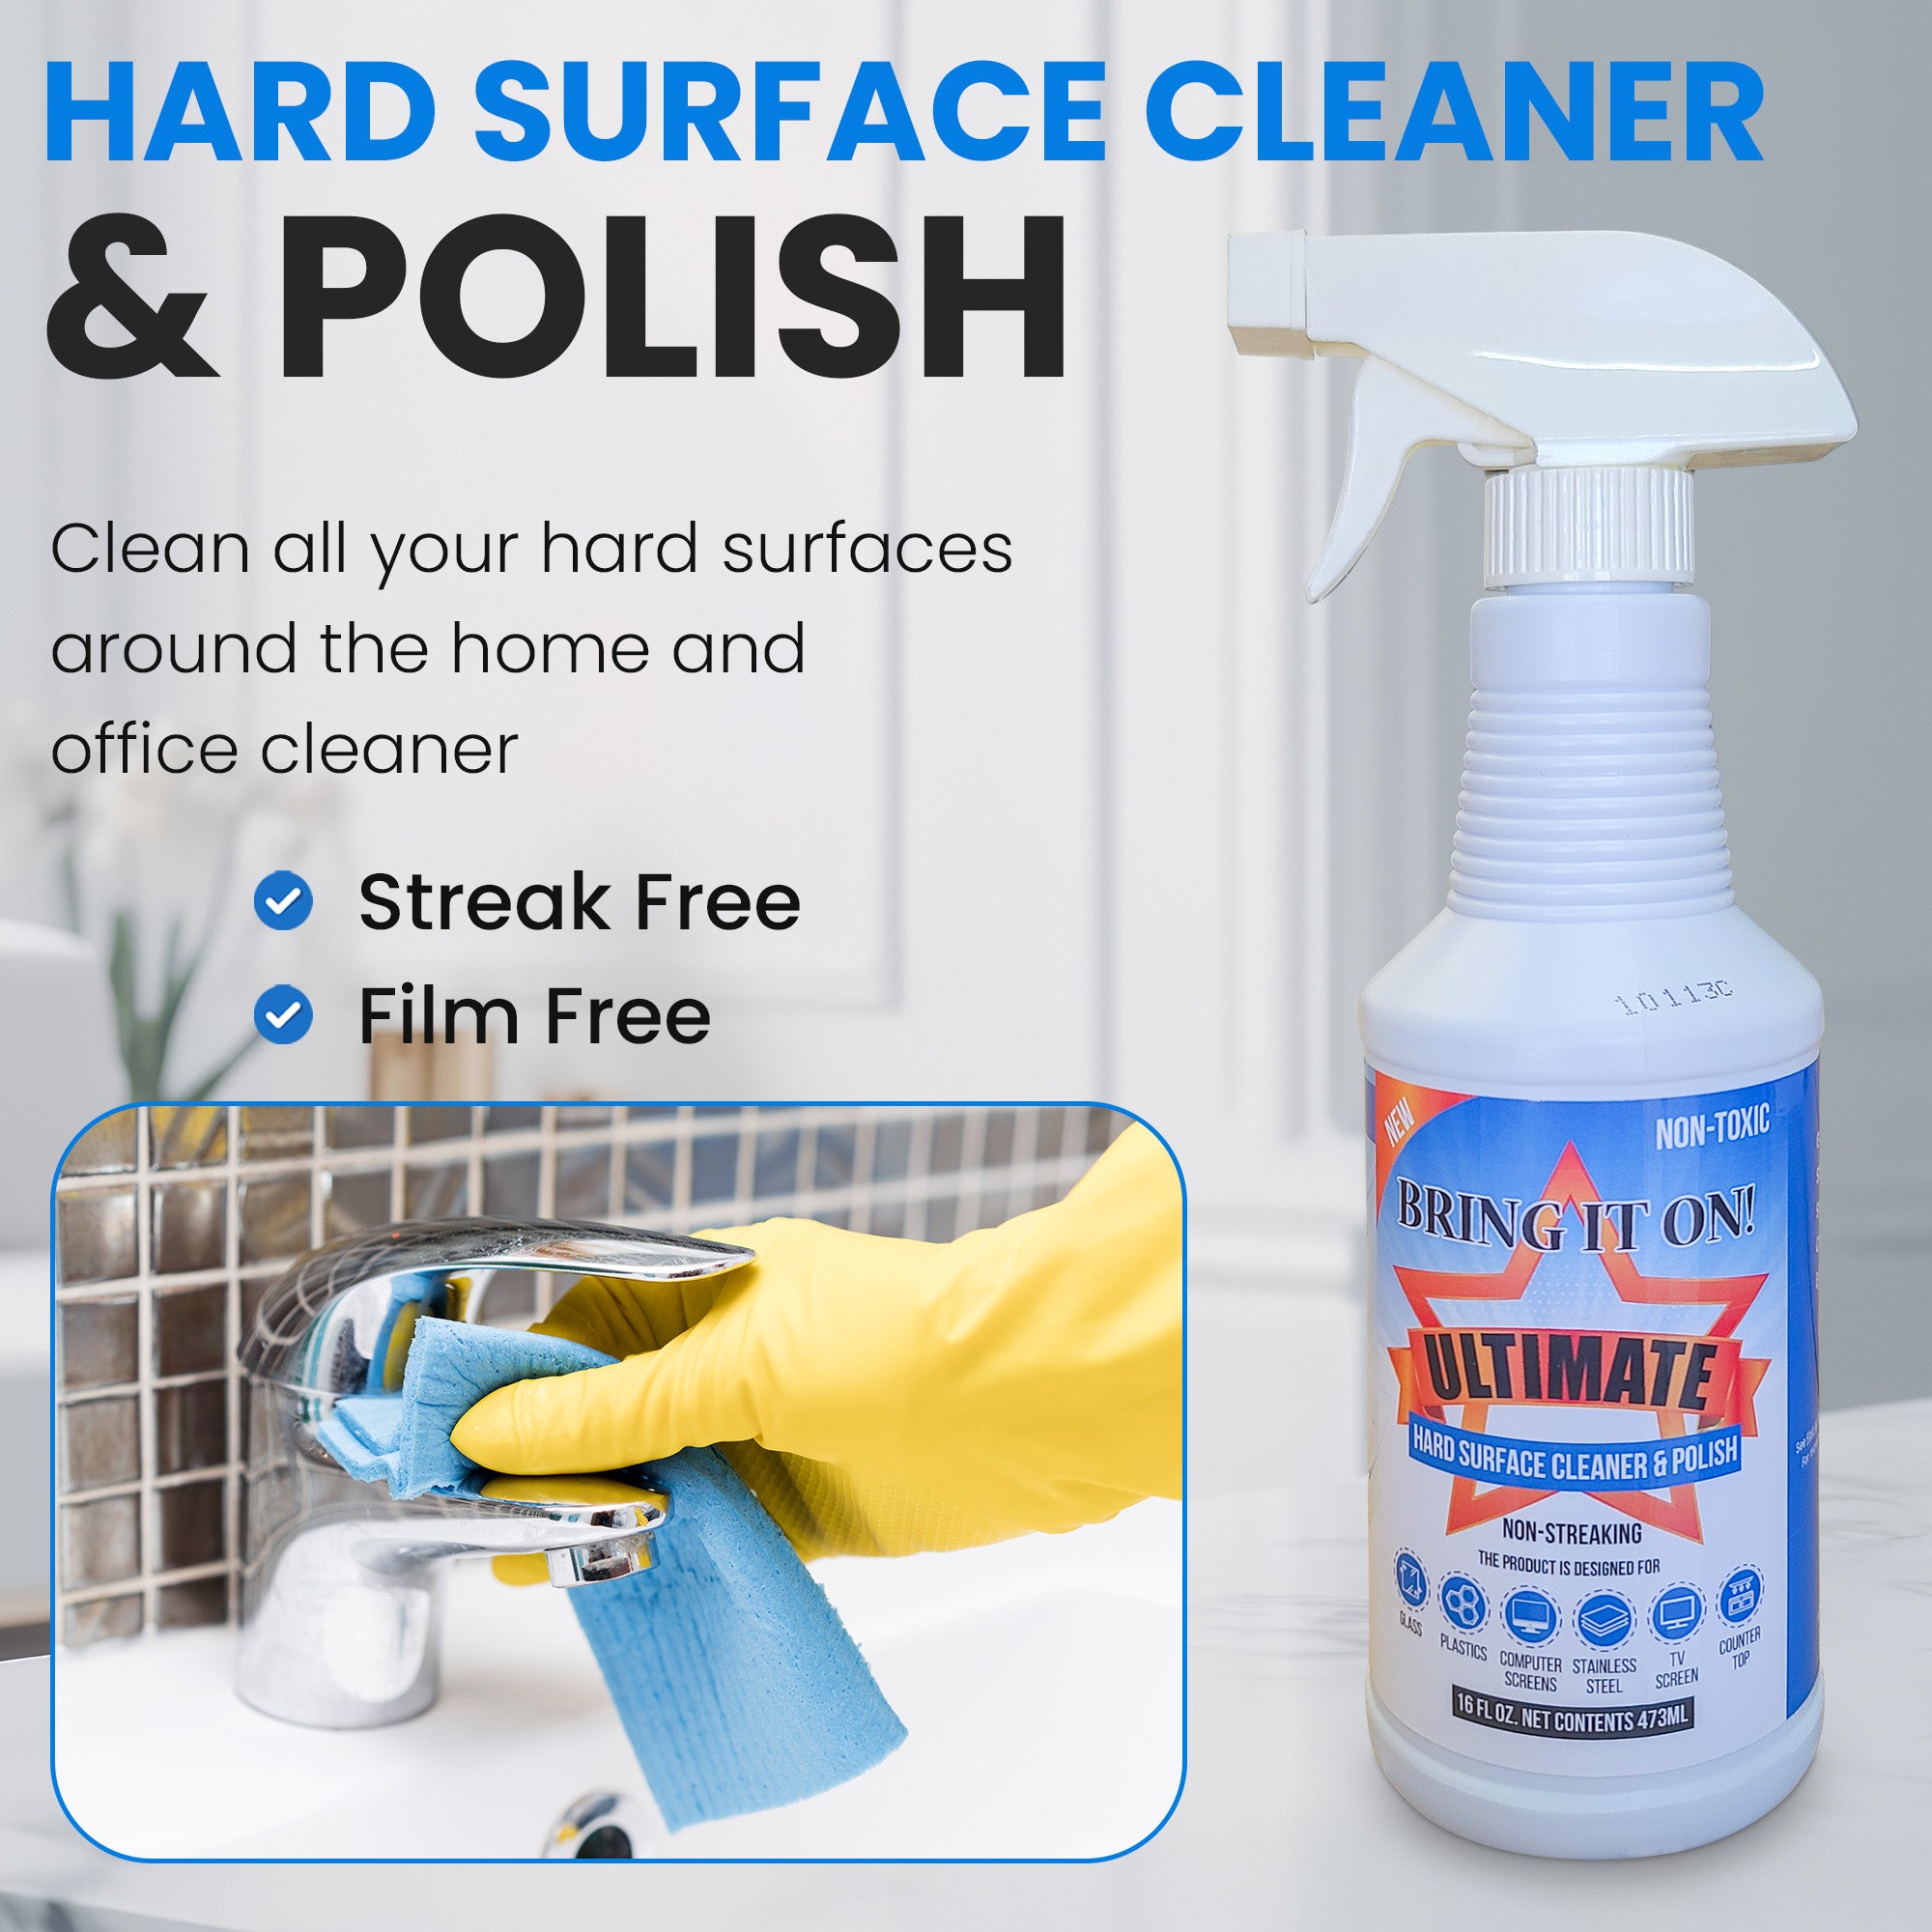 How to Clean Hard Surfaces